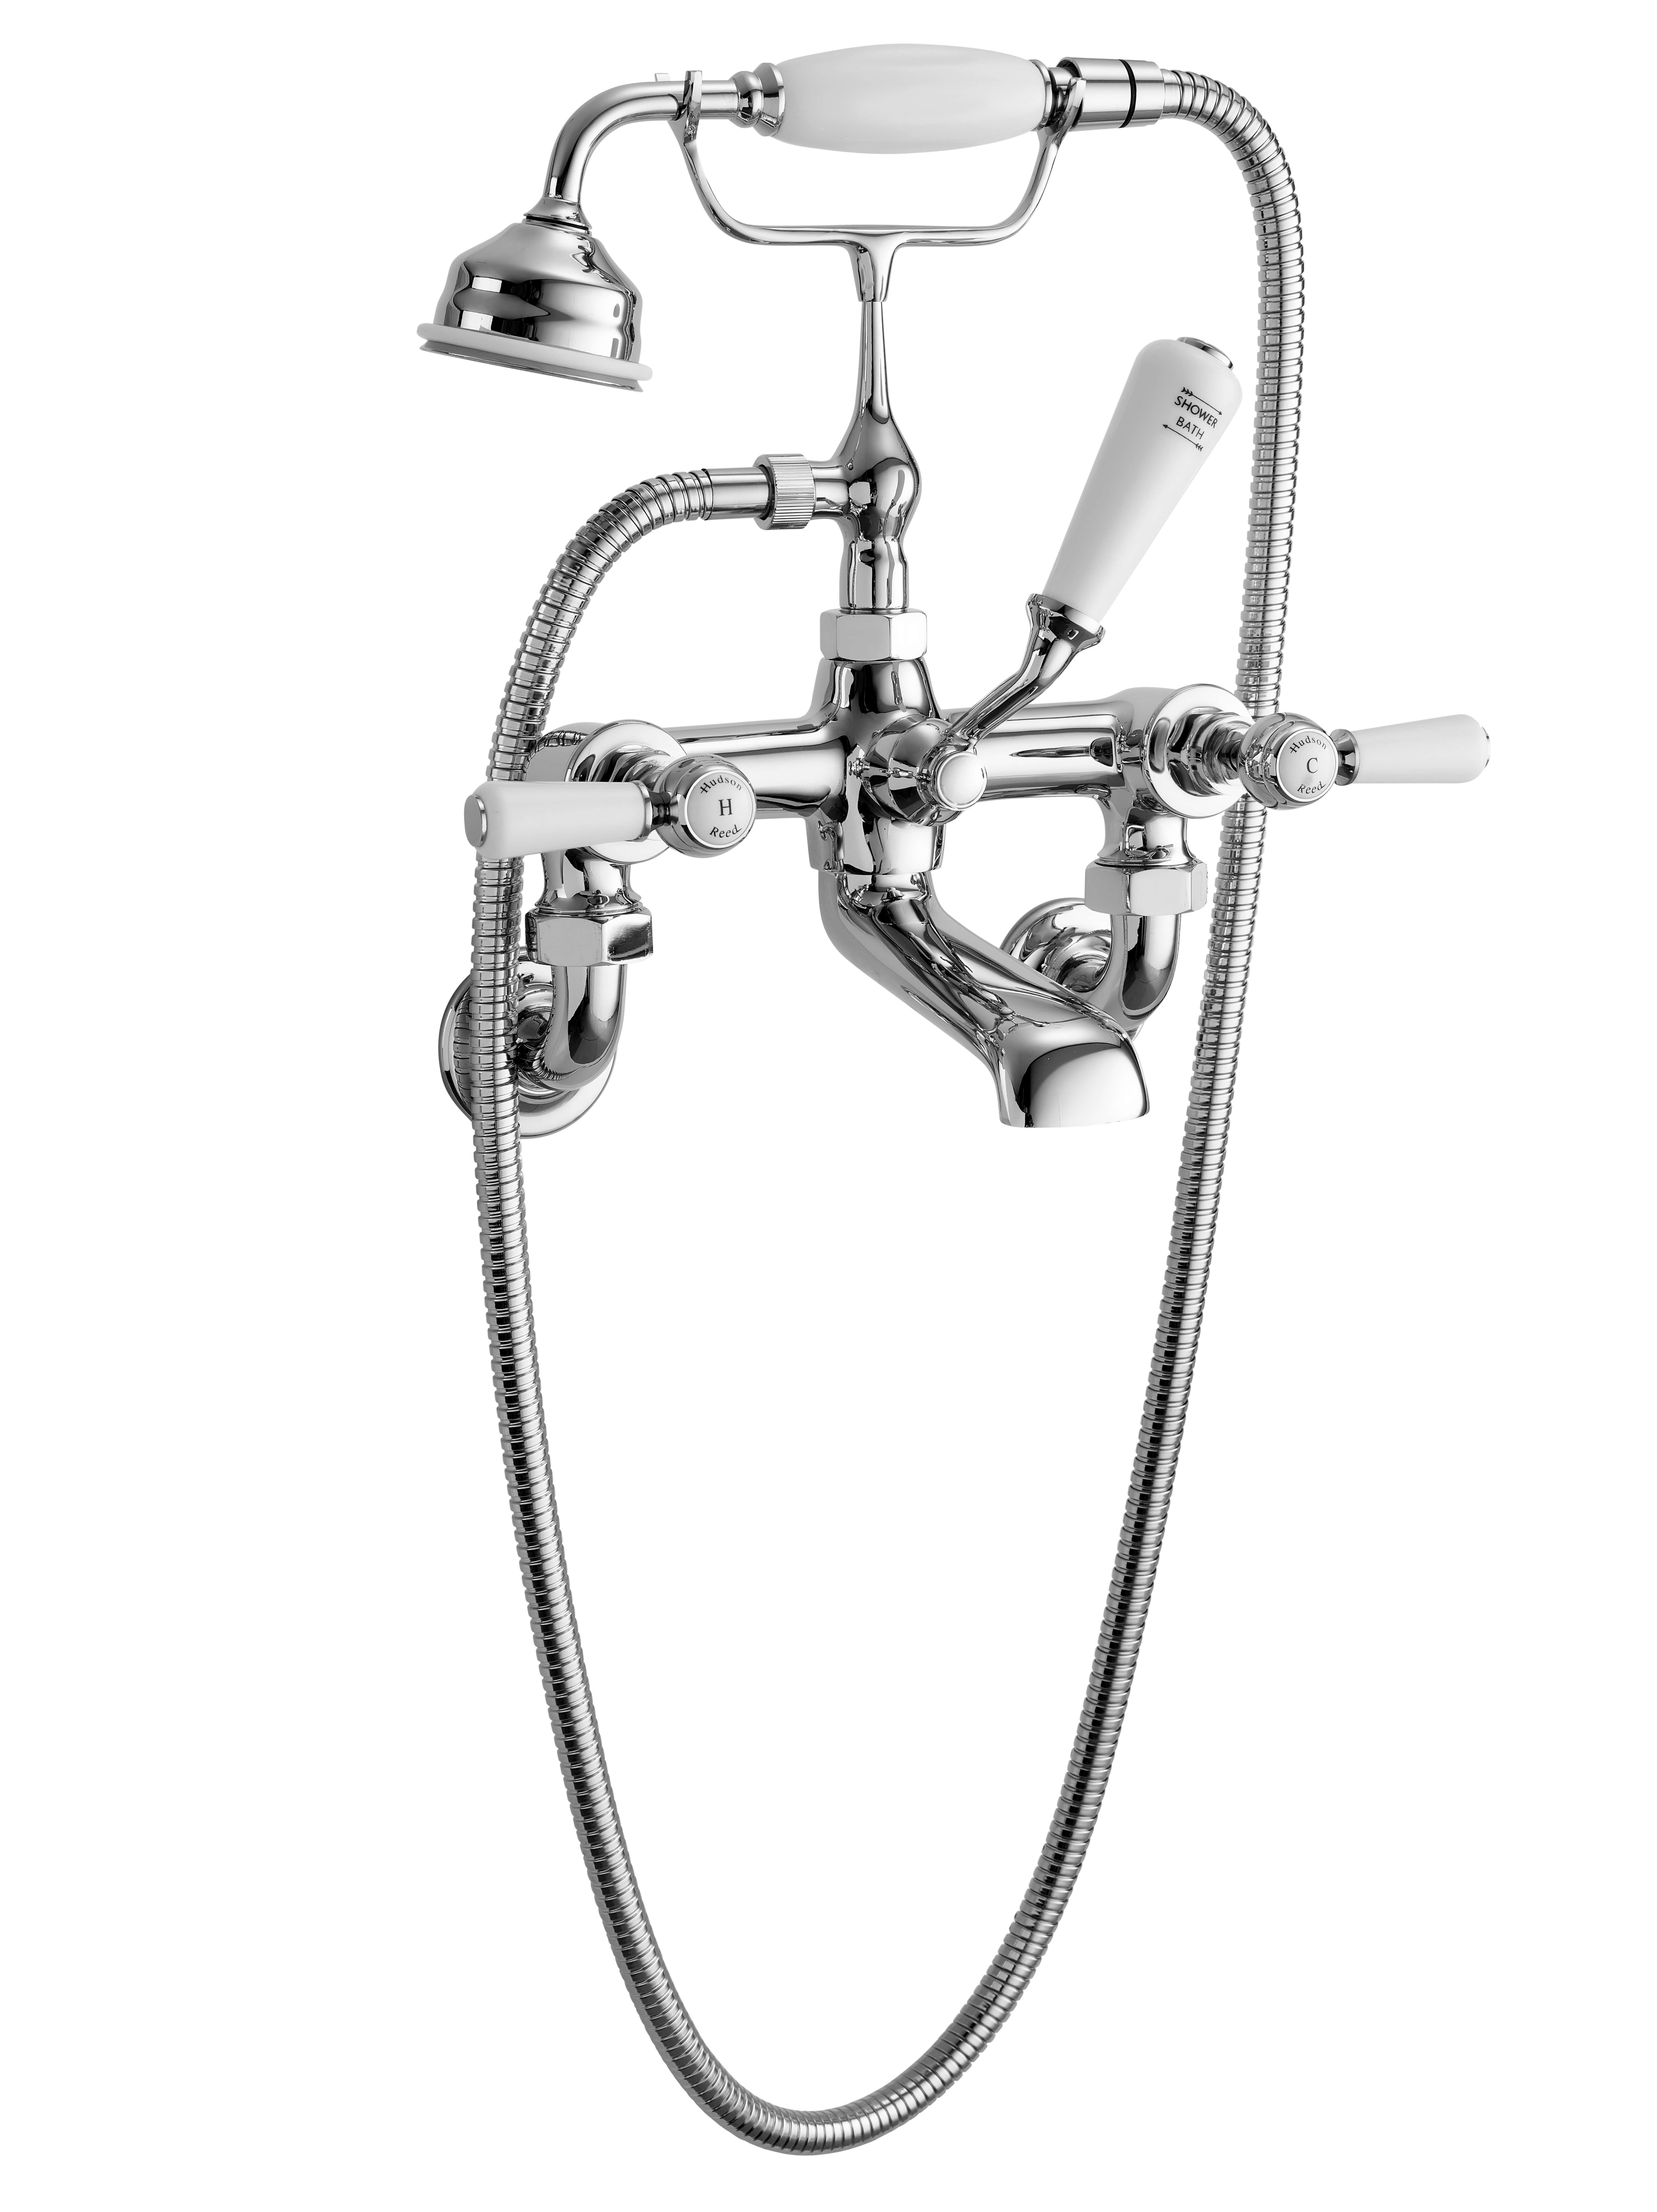 Hudson Reed Topaz with Lever Wall Mounted Bath Shower Mixer & Hexagonal Collar - White BC304HLWM (2461)